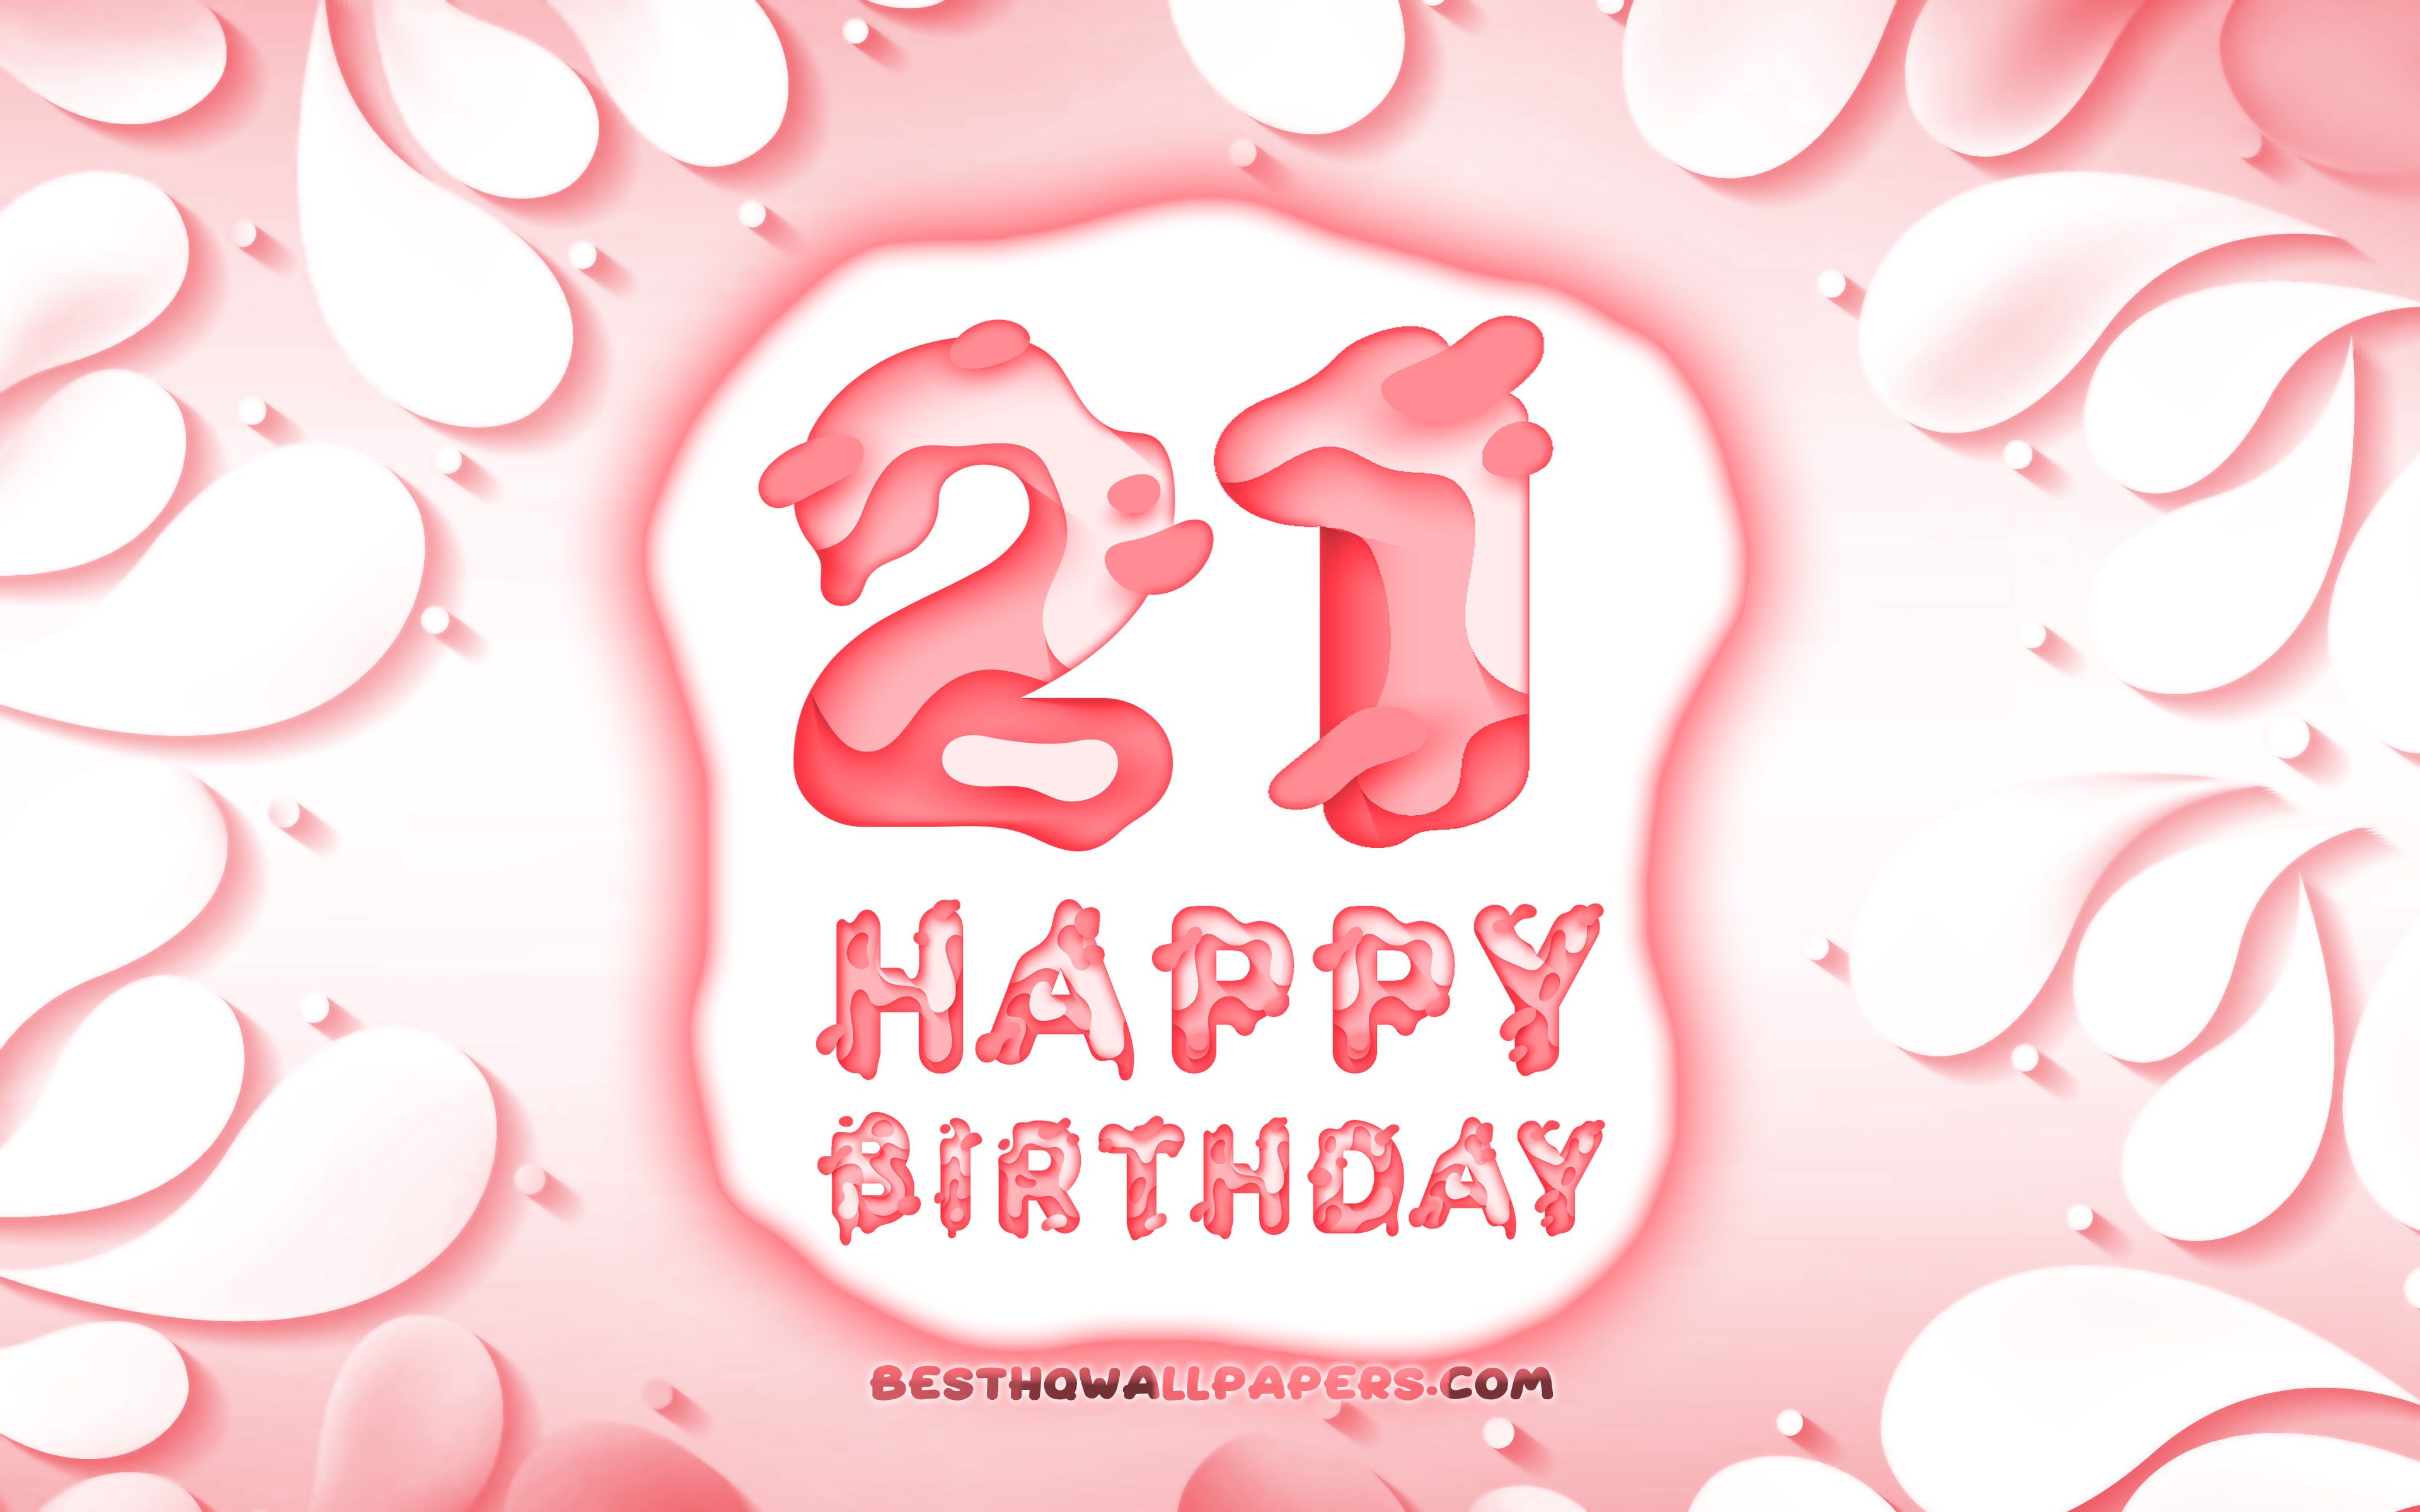 Download wallpaper Happy 21 Years Birthday, 4k, 3D petals frame, Birthday Party, pink background, Happy 21st birthday, 3D letters, 21st Birthday Party, Birthday concept, artwork, 21st Birthday for desktop with resolution 3840x2400